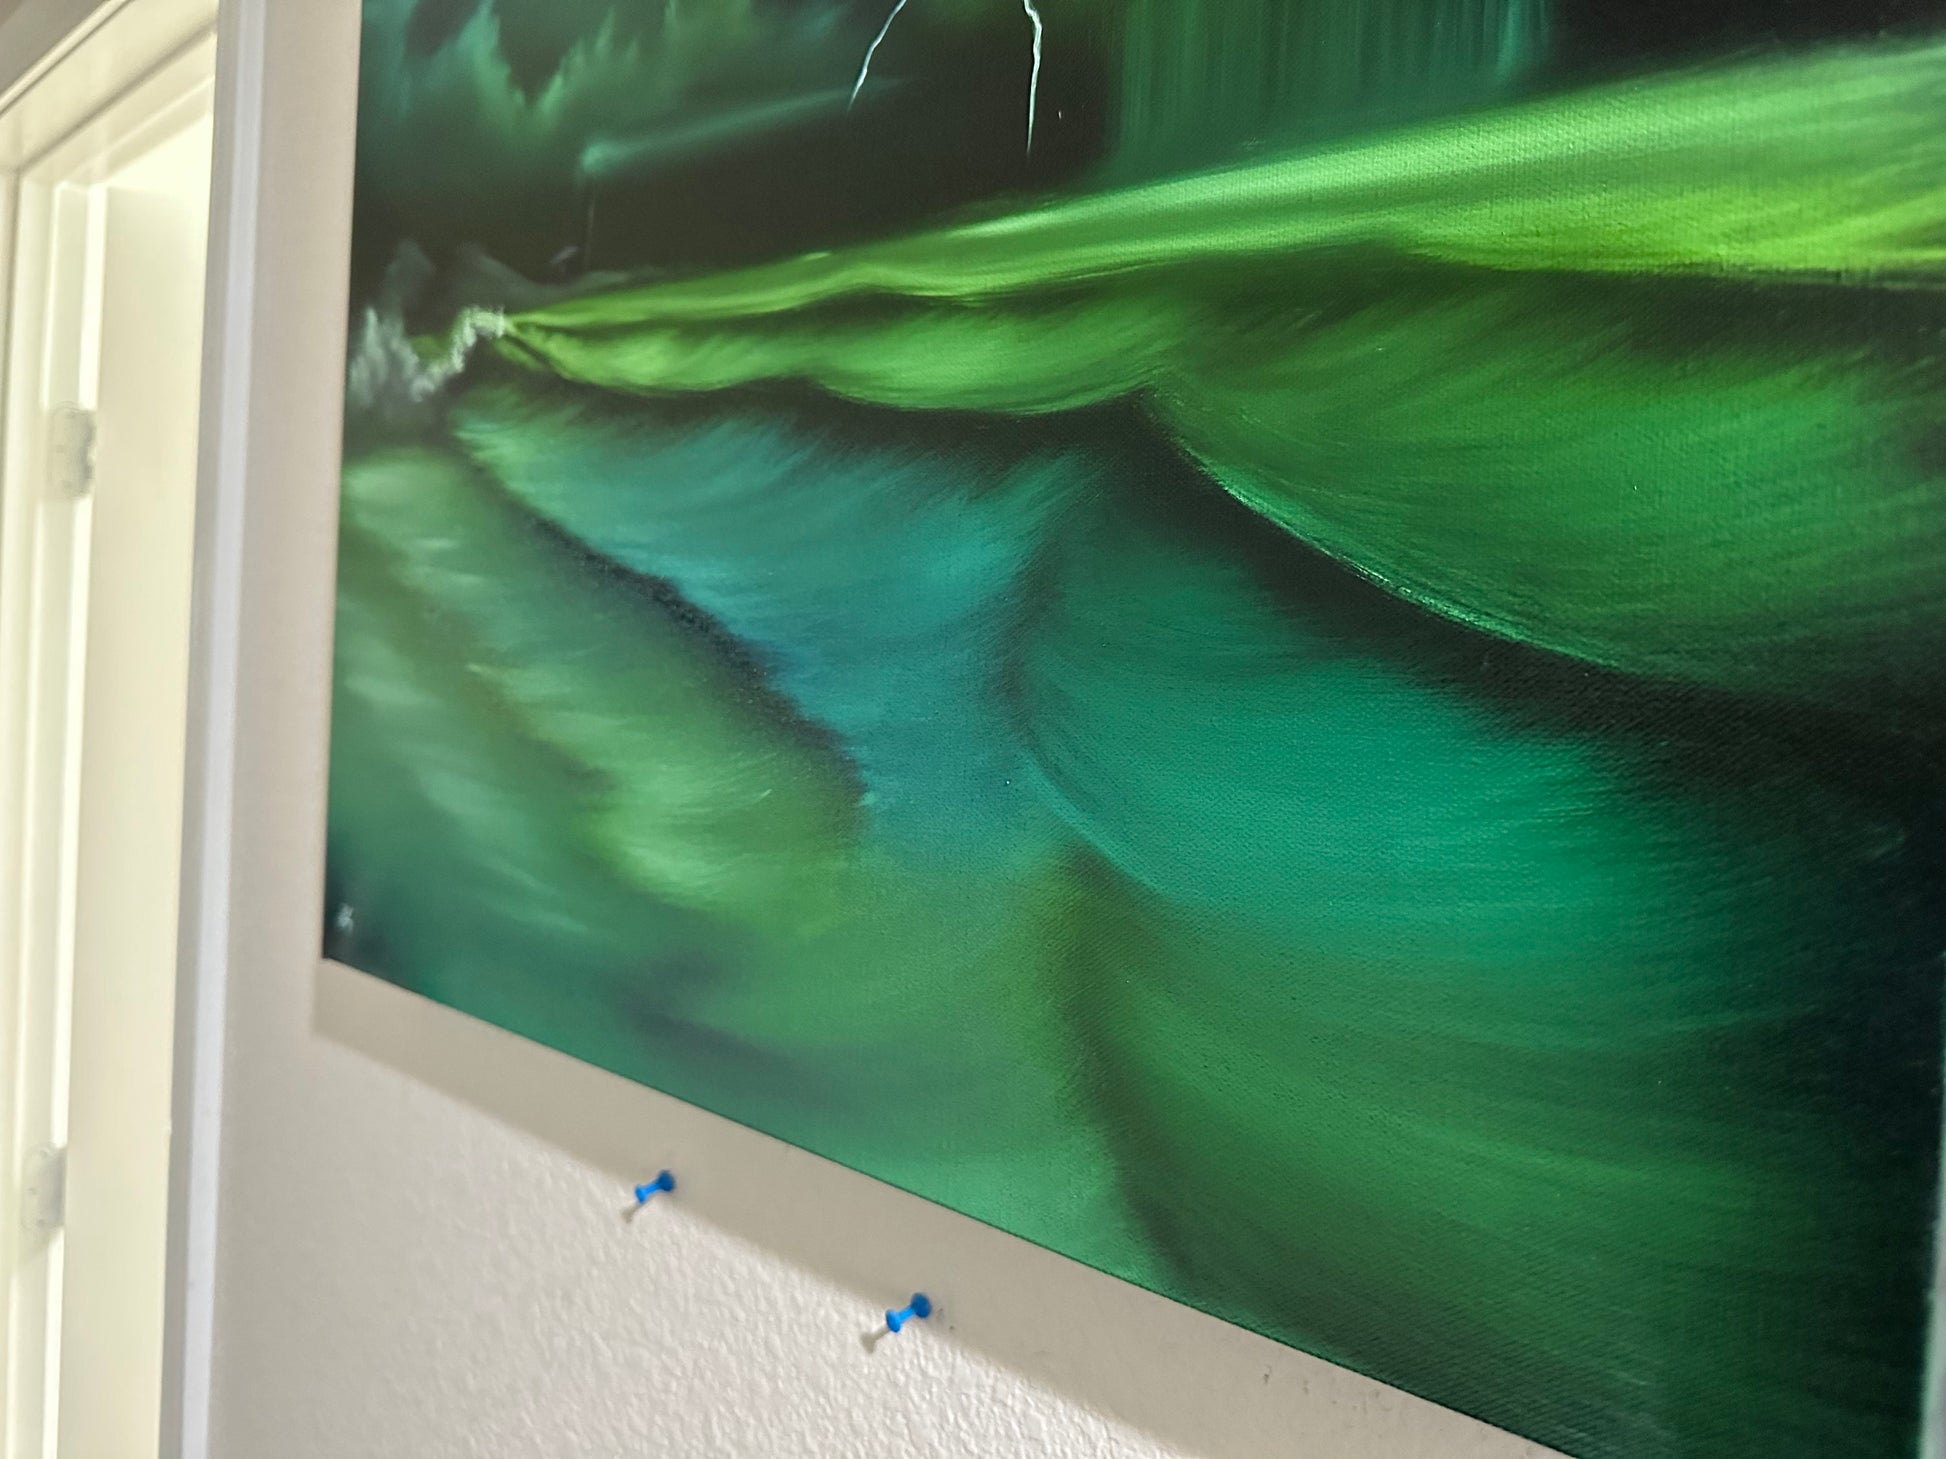 Painting 931 - 24x24" Pro Series Canvas Blue/Green Seascape with Soft Waves painted Live on TikTok on 9/4/23 by PaintWithJosh